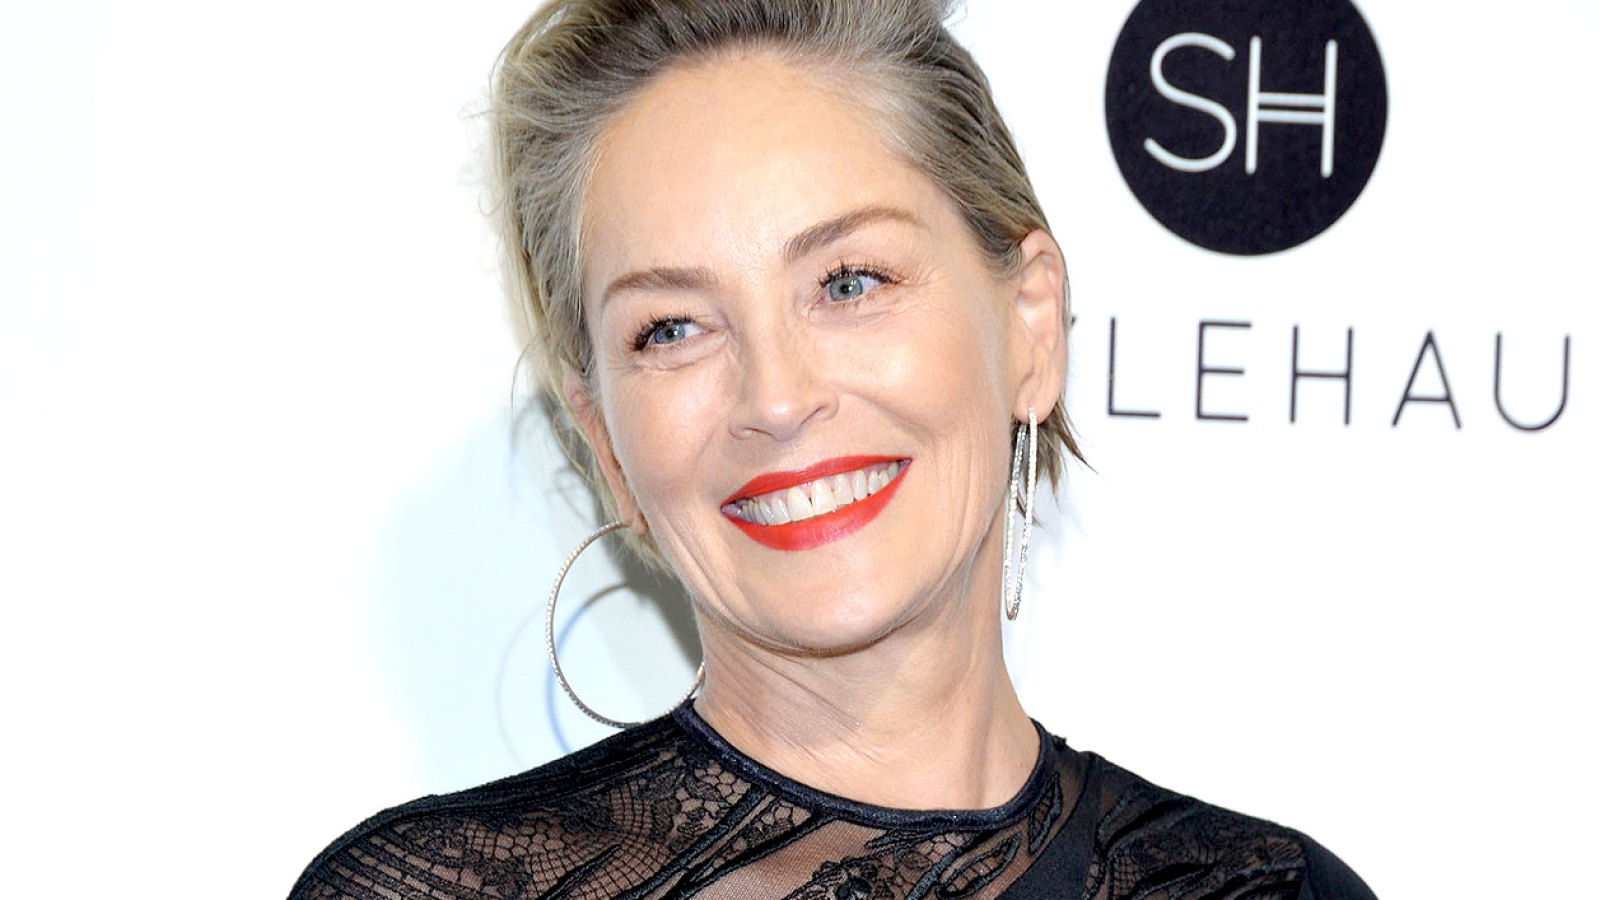 Sharon Stone attends the 25th Annual Elton John AIDS Foundation's Academy Awards Viewing Party at The City of West Hollywood Park on February 26, 2017 in West Hollywood, California.